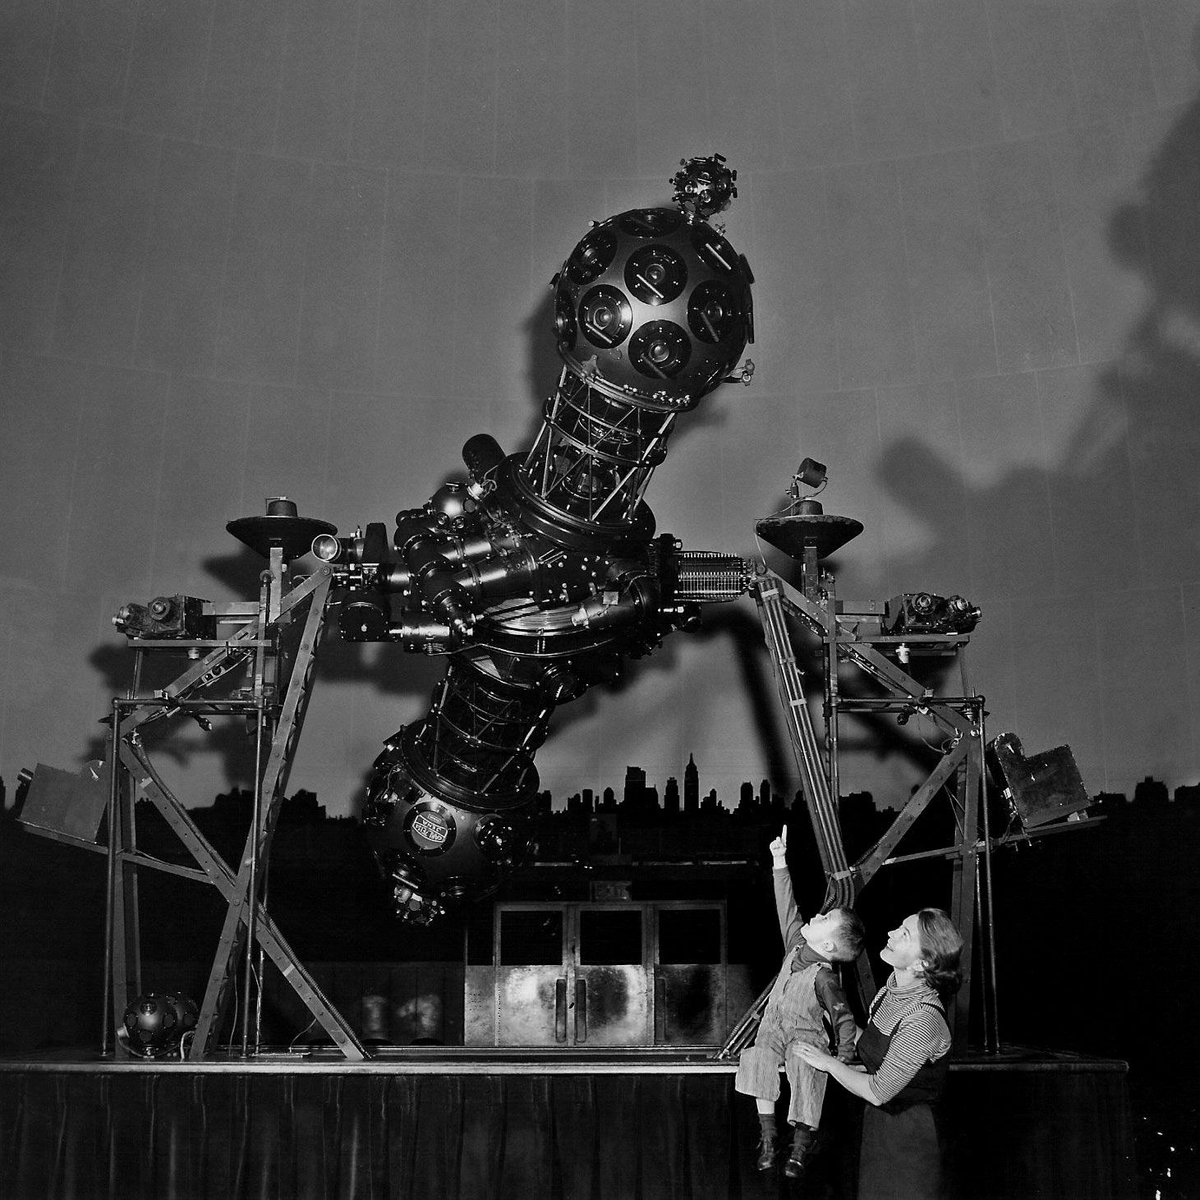 1957: The Hayden planetarium, NYC _ The Zeiss Mark II projector in use at the planetarium from 1935 to 1960 _ For more pictures like this, follow @retronauthome @retronauthq